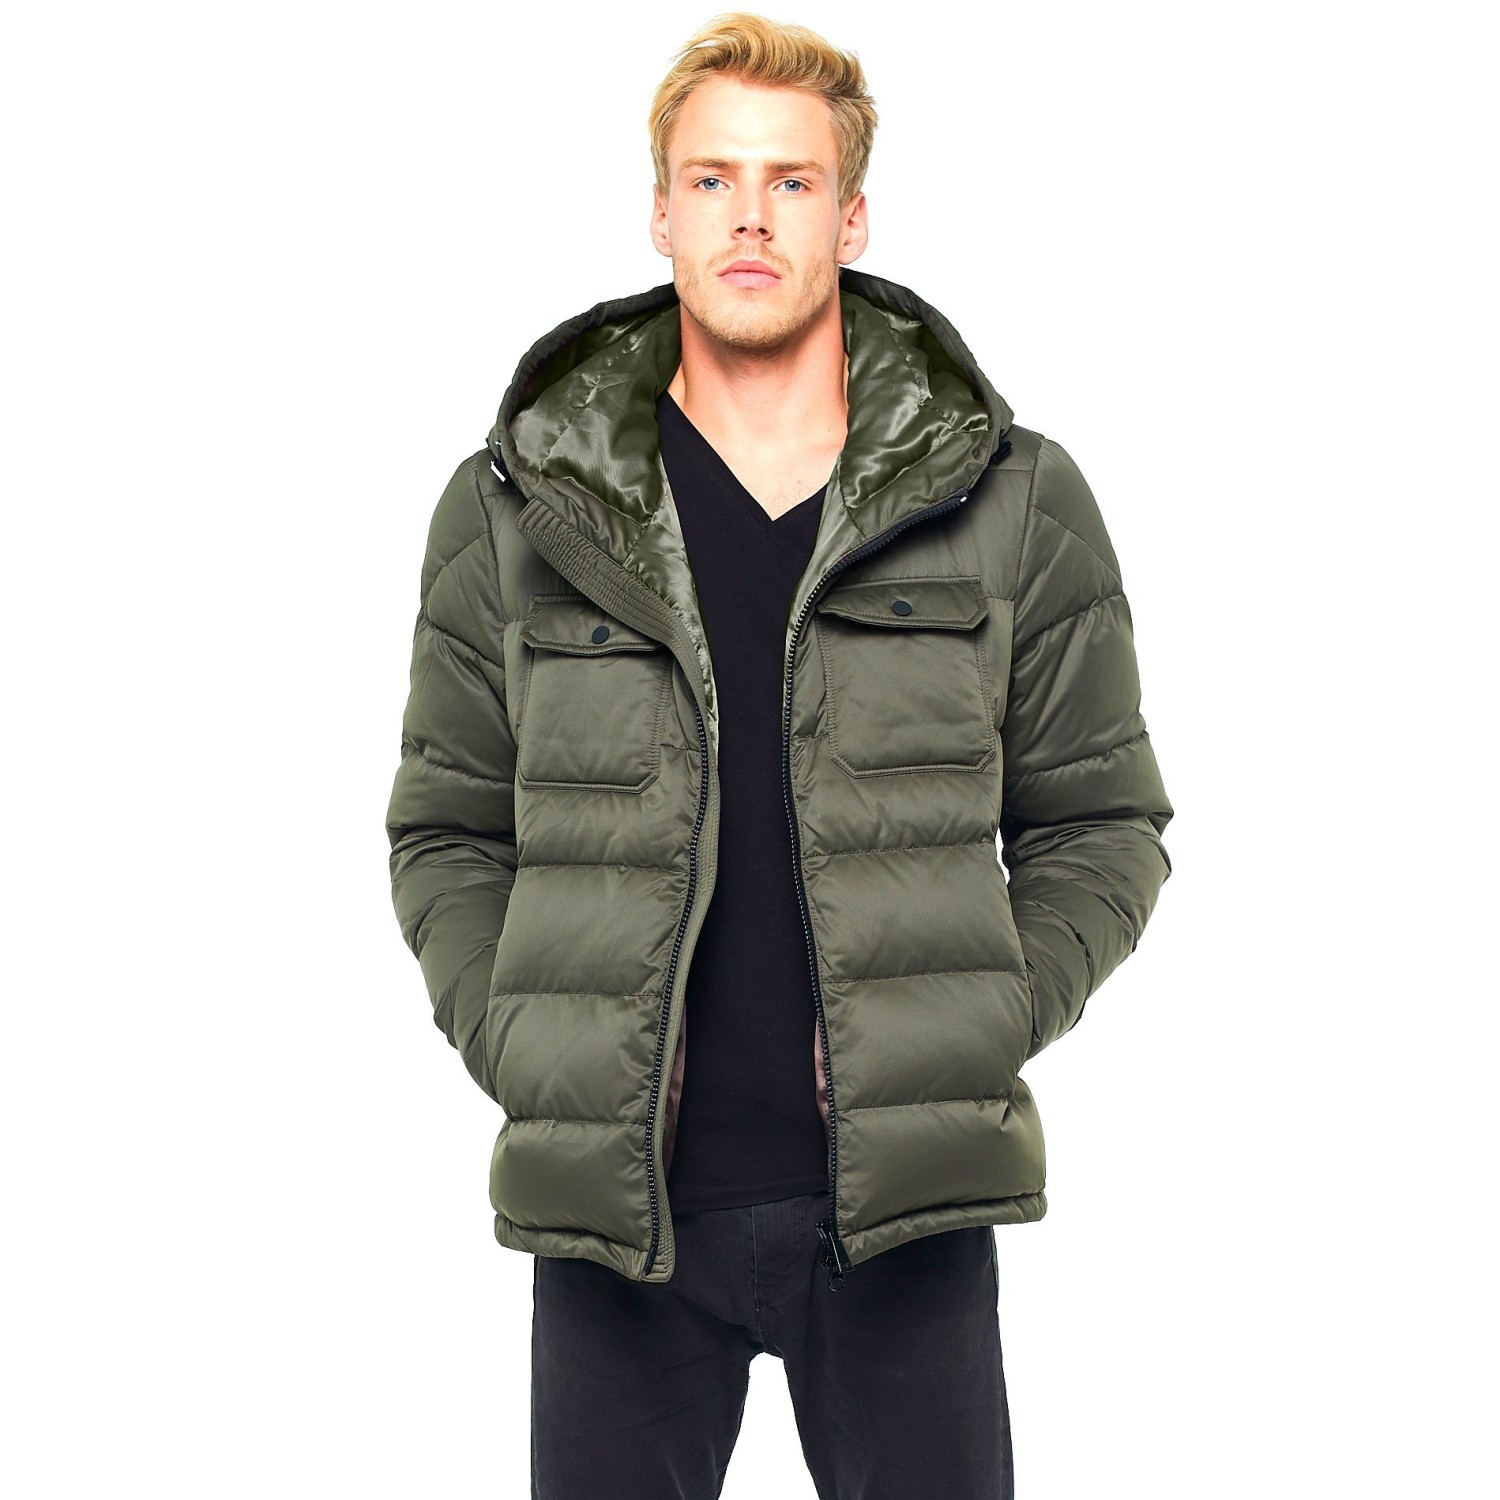 MORCOE Men’s Winter Puffer Coat Casual Outerwear Thicken Parka Windproof Outdoor Jacket with Faux Fur Hood 